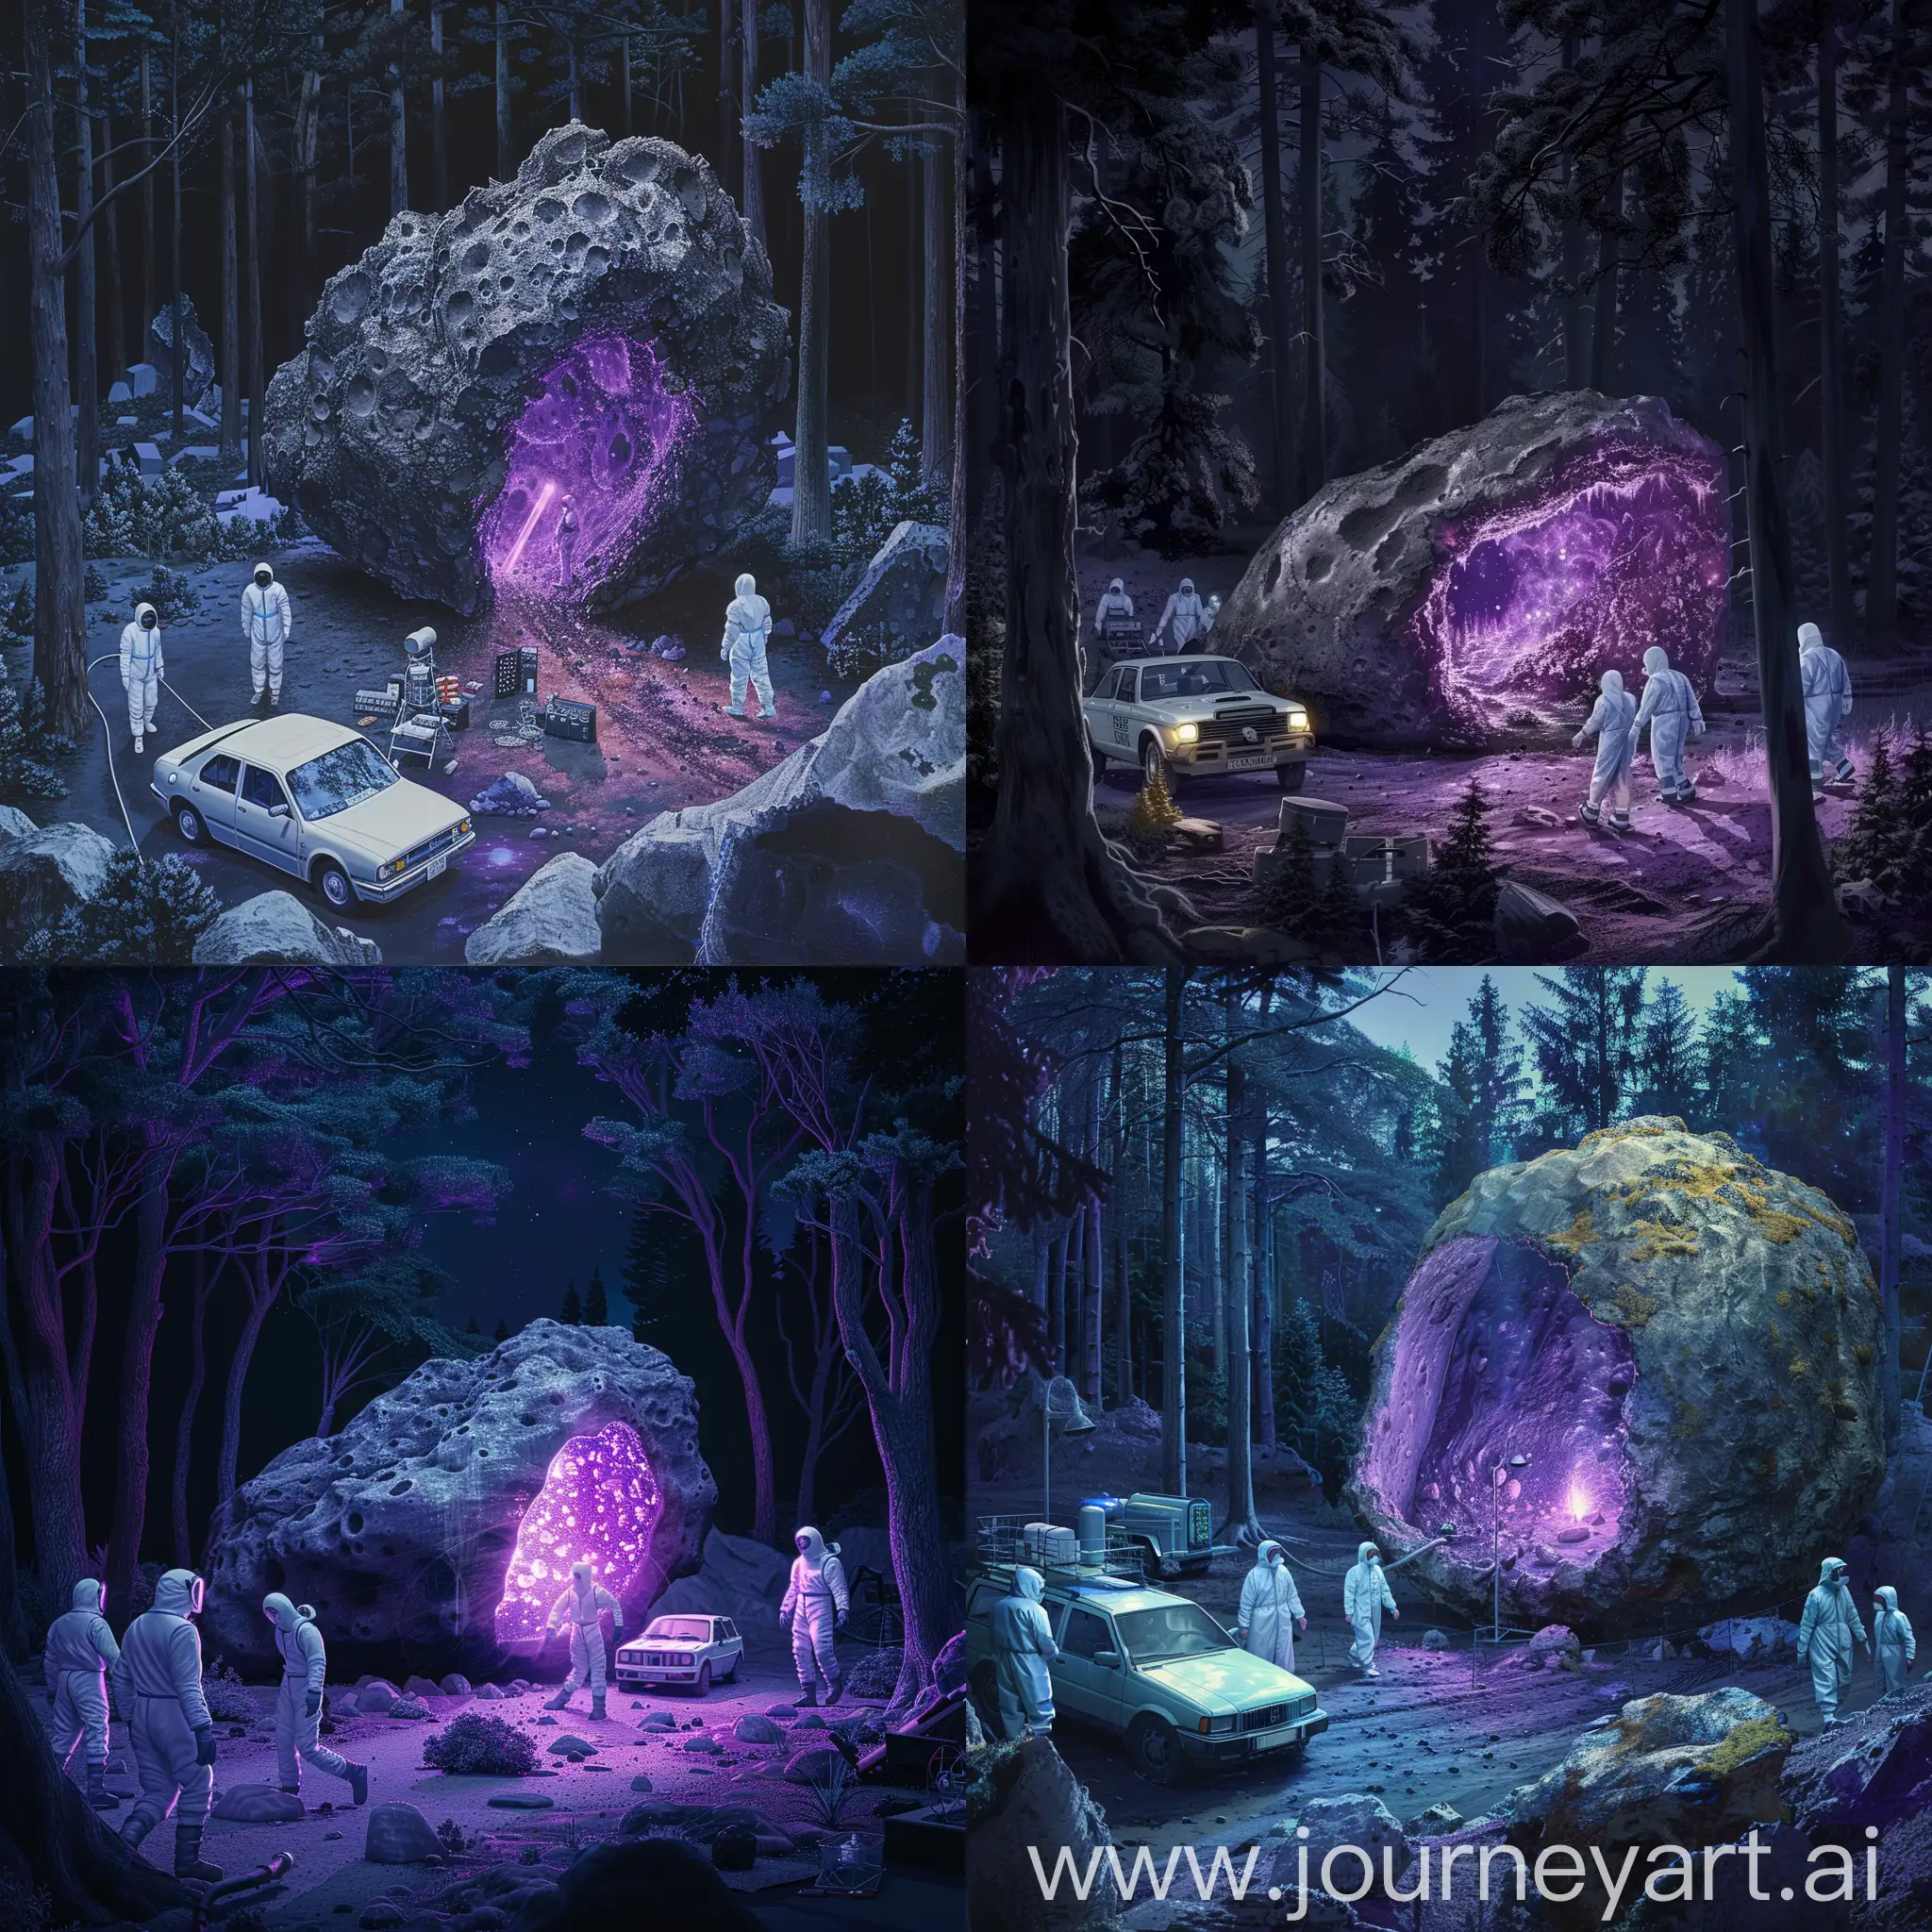 night forest. An entire asteroid lies on the ground, inside of which there is a dim purple glow.
Scientists in white protective overalls walk near him, as well as a car and equipment for research